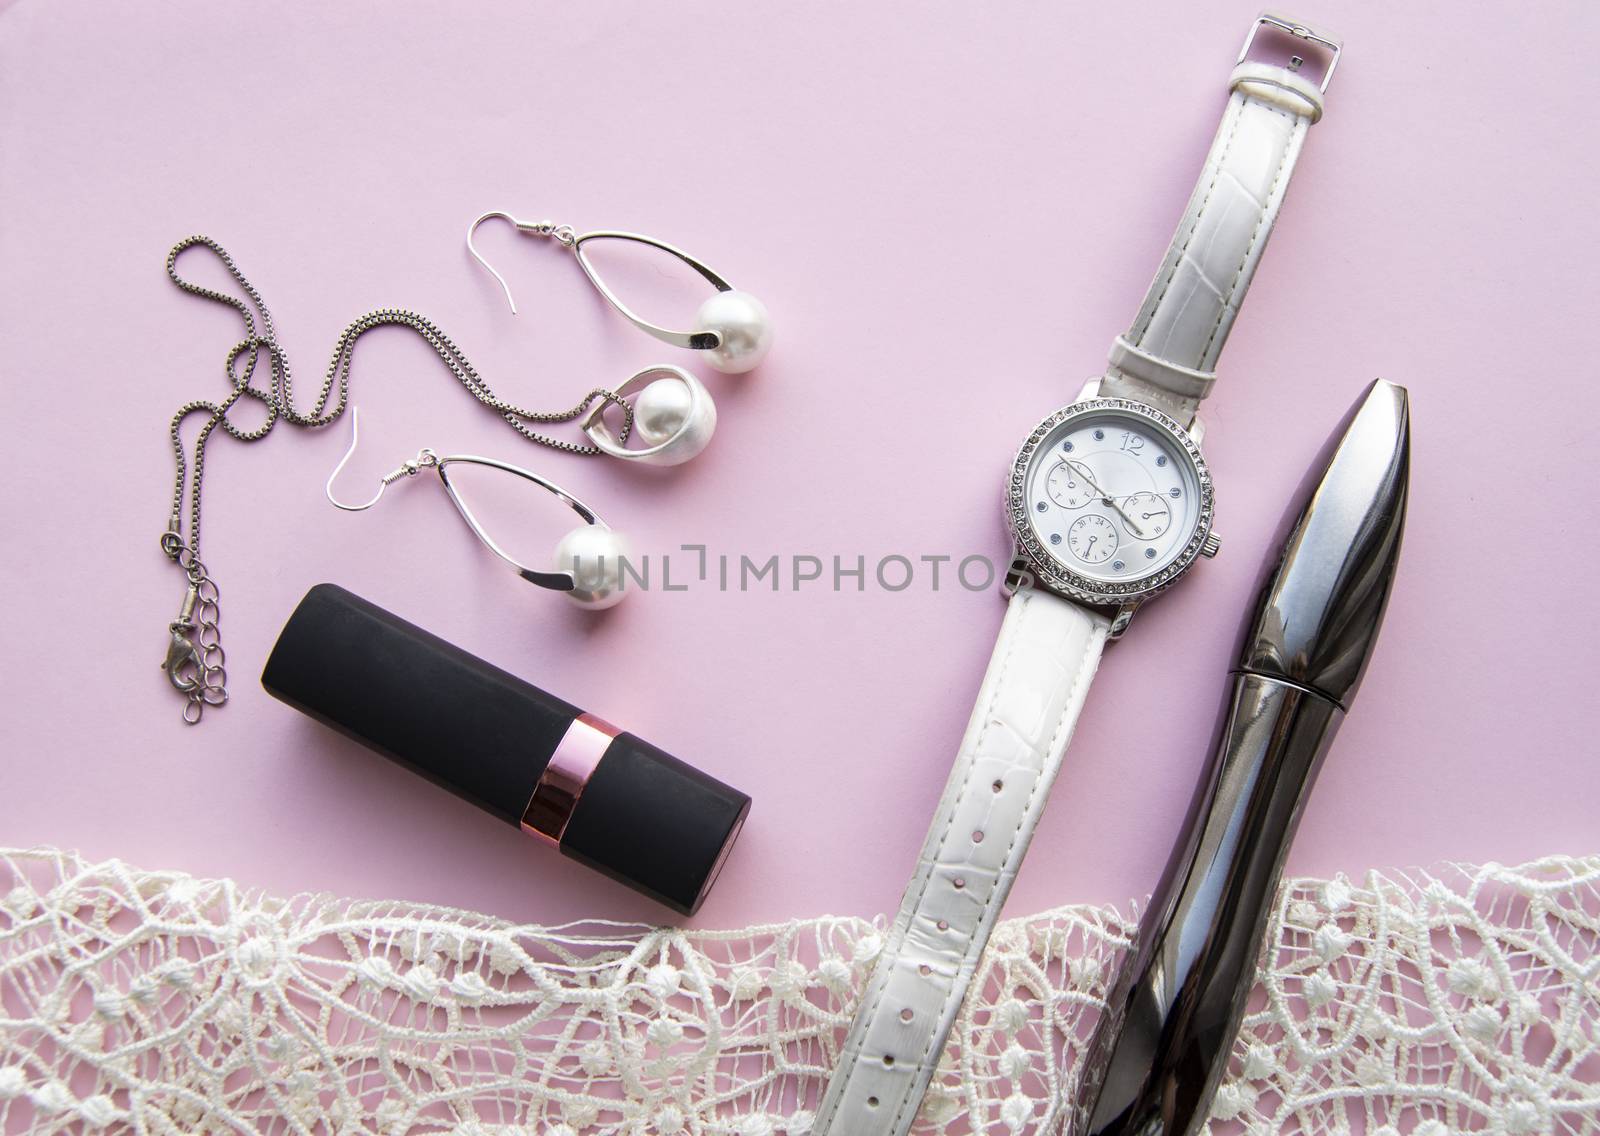 flat lay women's accessories collage with stylish watches, earrings and pendant with white pearls, lipstick, mascara on a Lacy pink background by claire_lucia